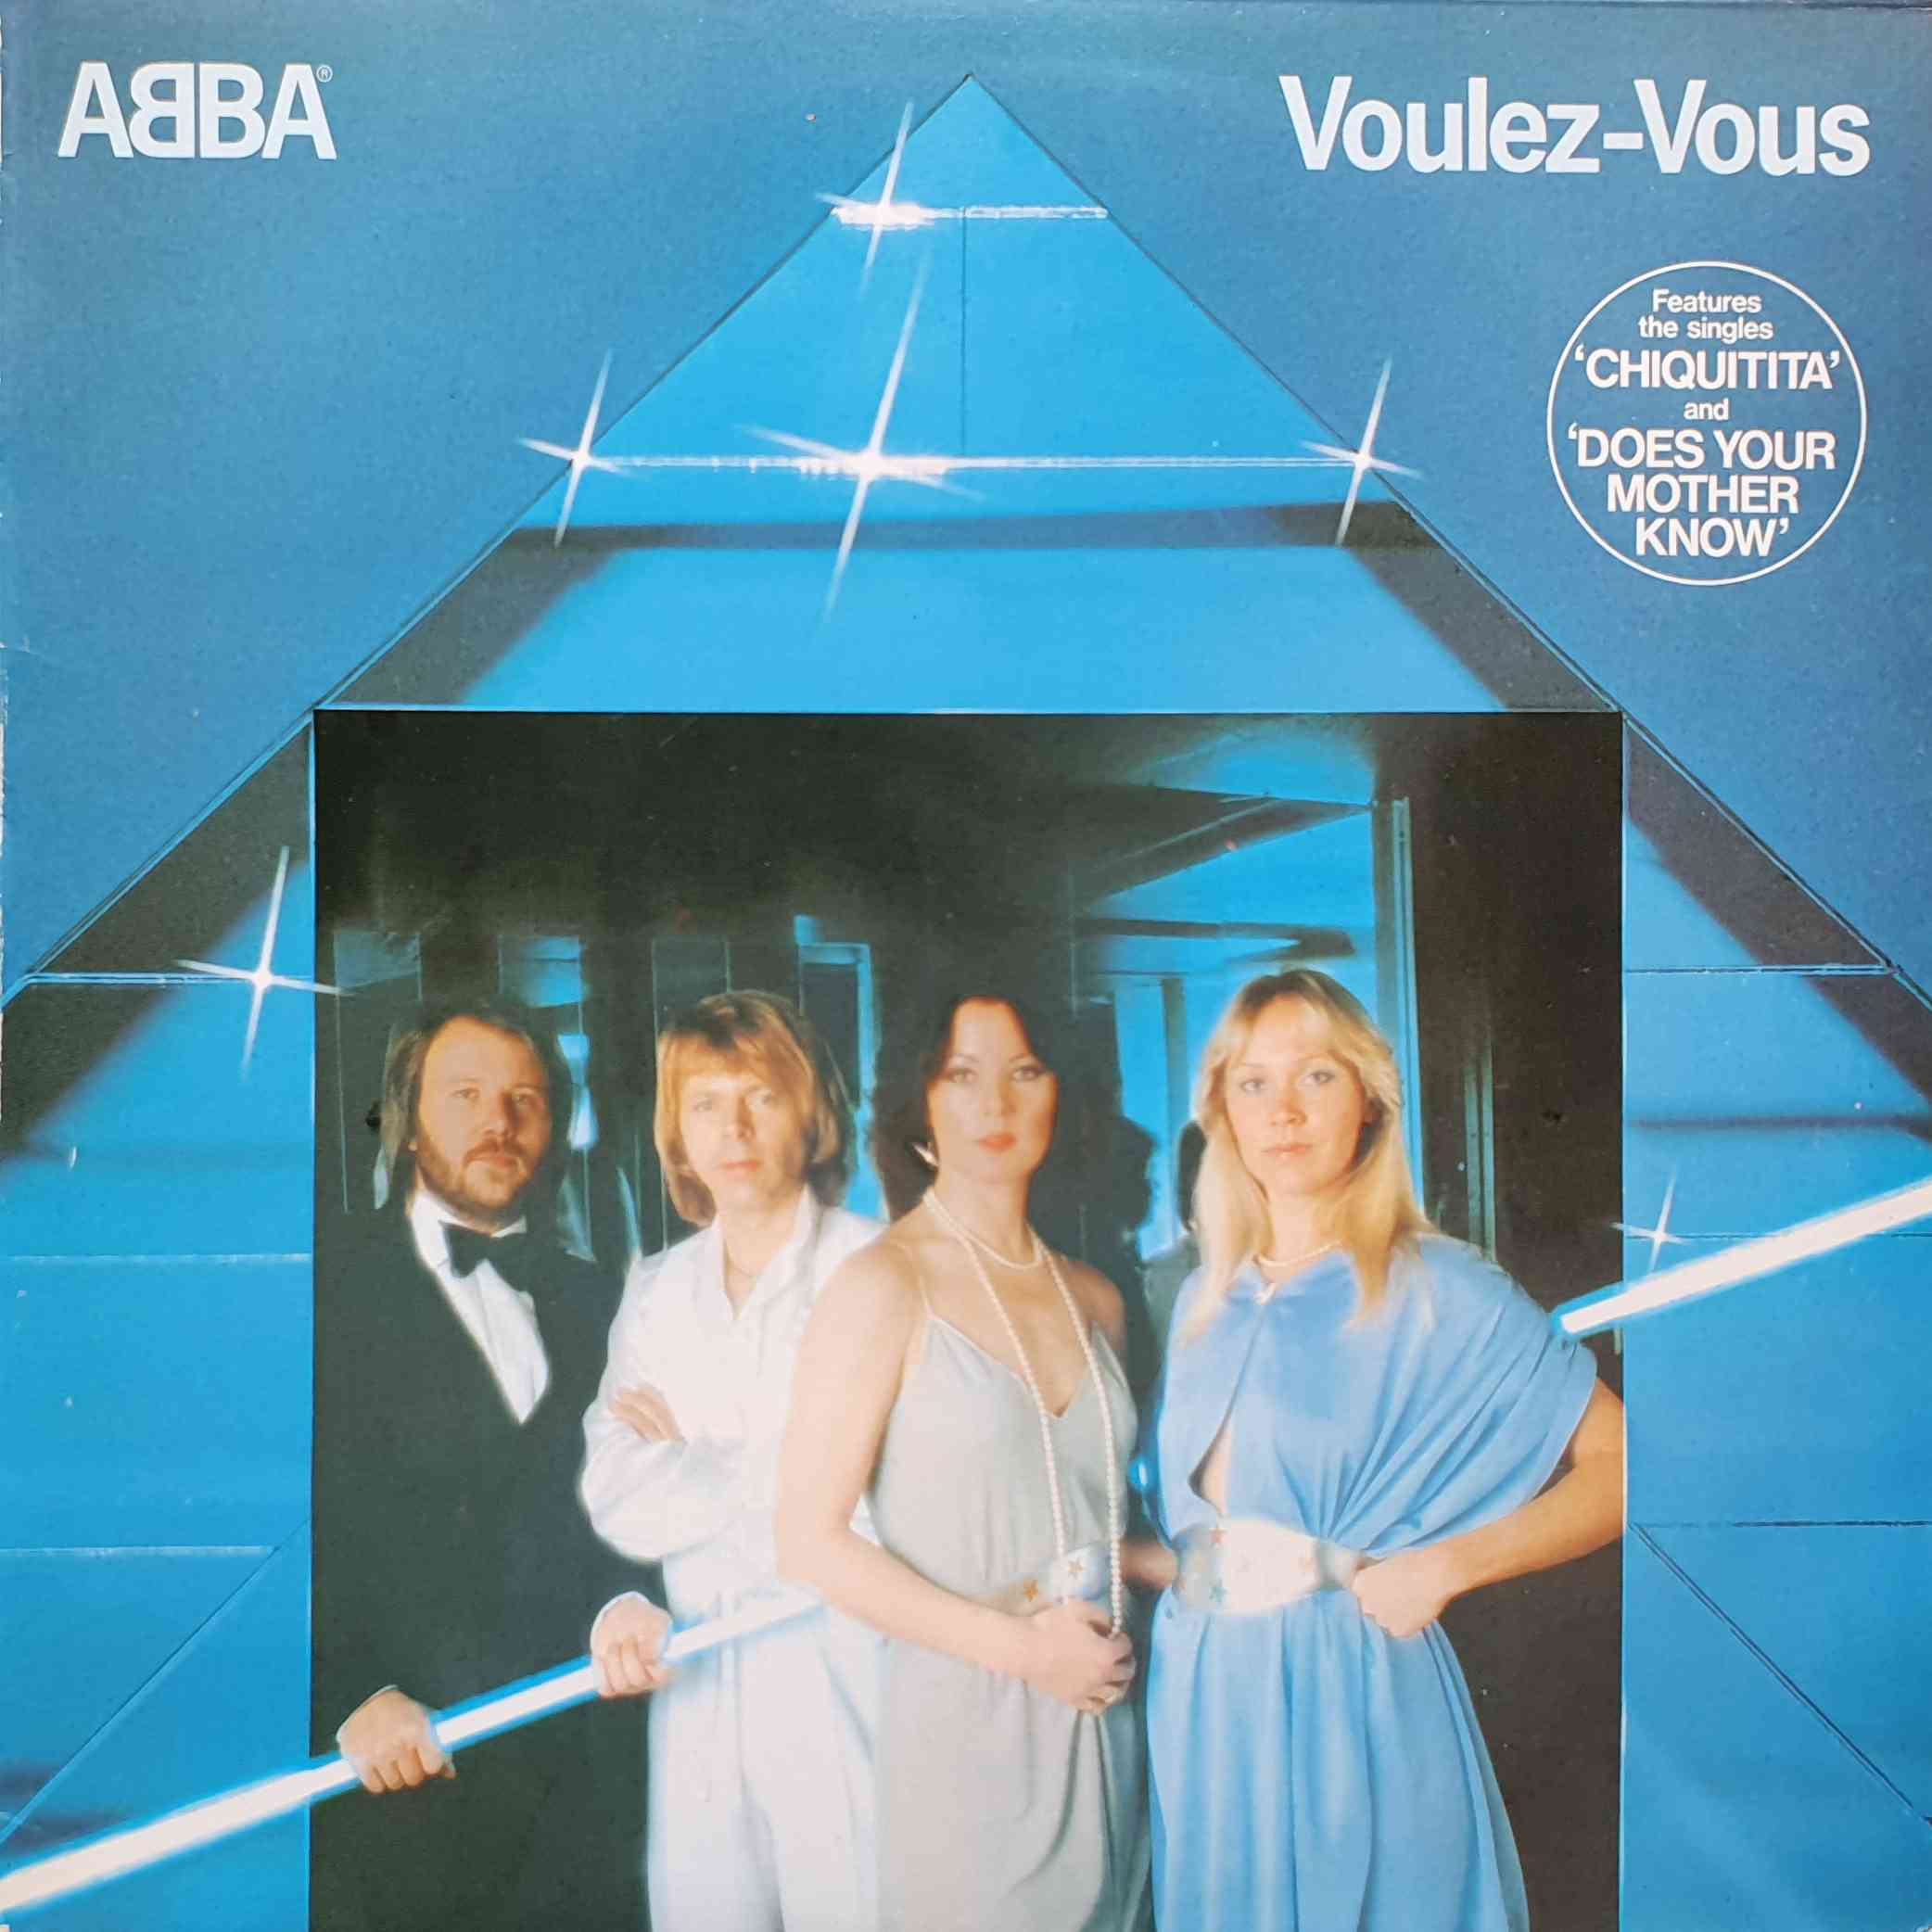 Picture of EPC 86086 Voulez-vous by artist Abba 